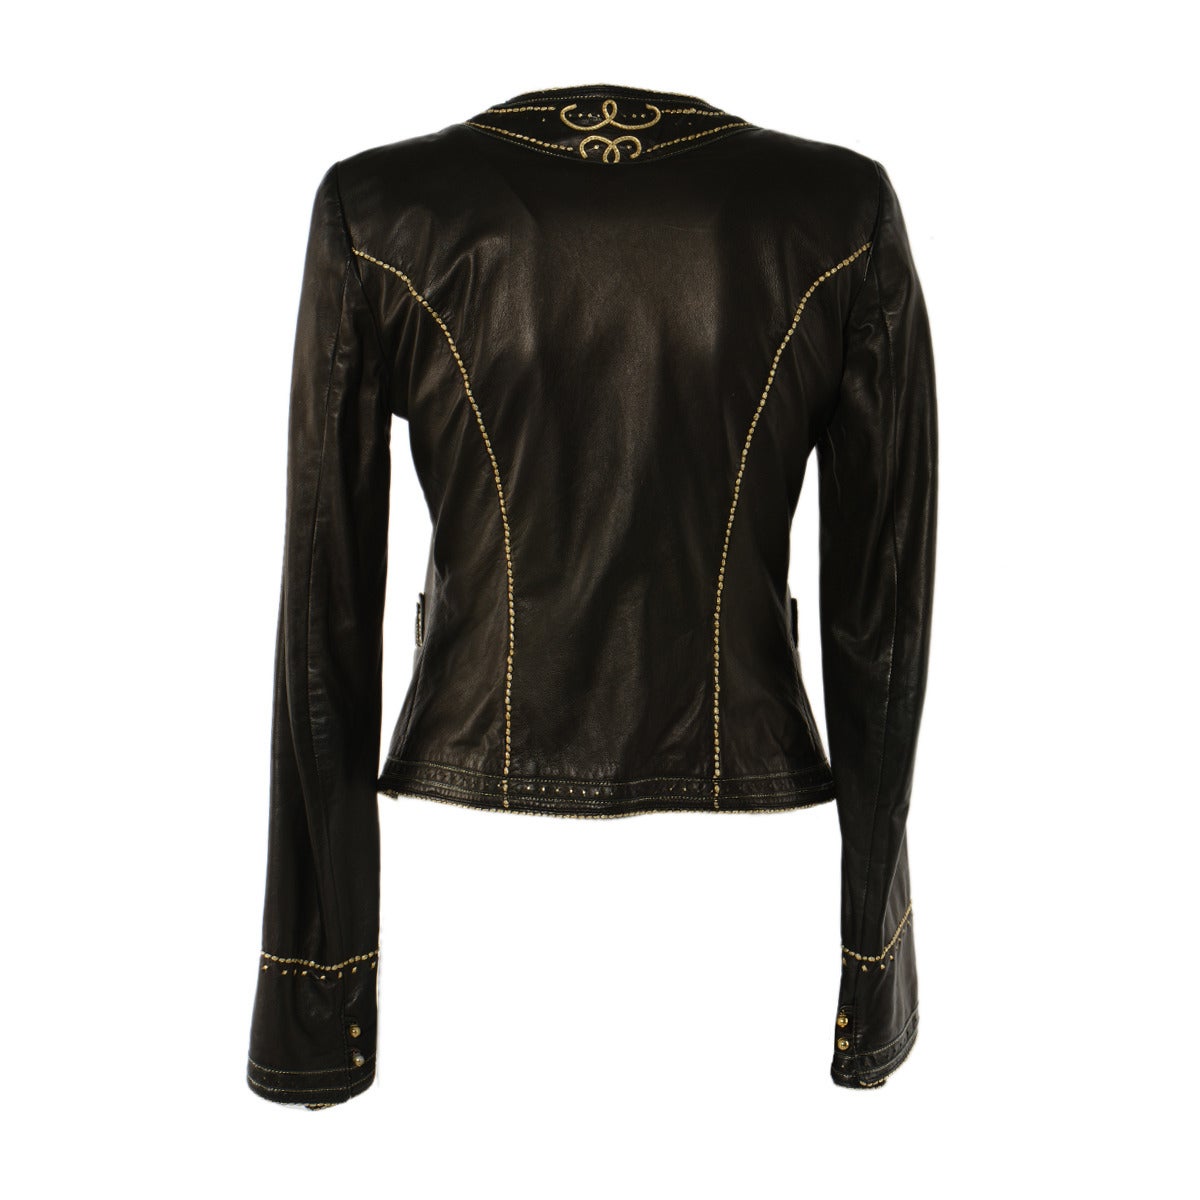 Fantastic jacket by Roberto Cavalli
Supersoft black leather
Amazing work of golden trim embroidery that makes an artistic design
Embroidery in front, back, sleeves, pockets and profile
2 Pockets
Green 100% silk lining
Size italian 40 (US